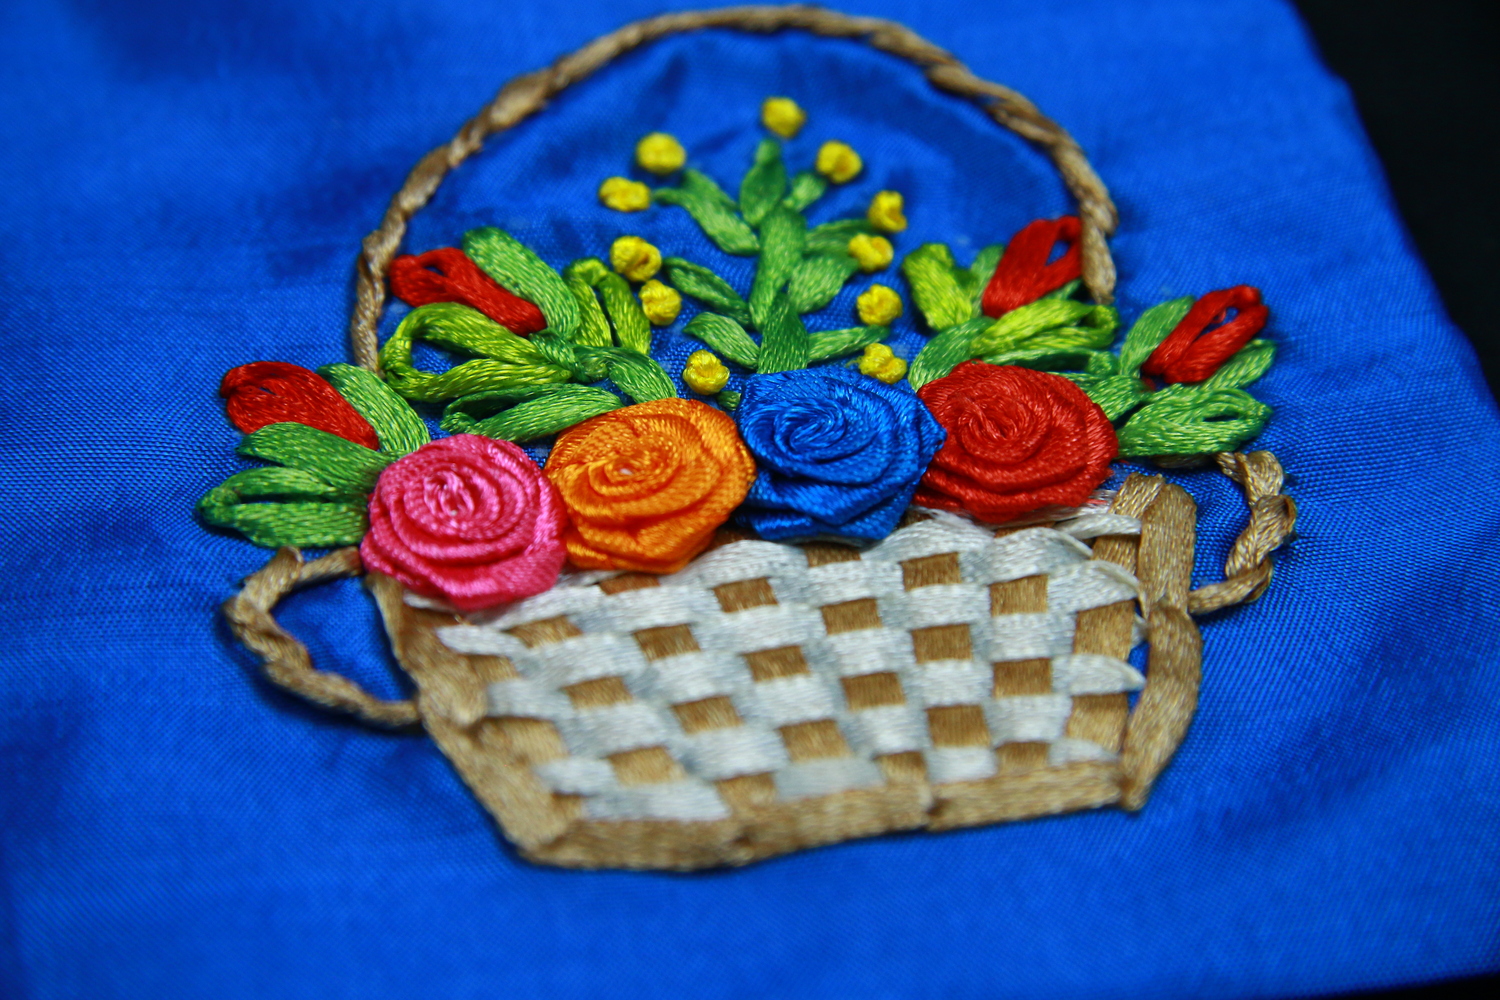 Rose Basket Pouch Hand Embroidered Size S